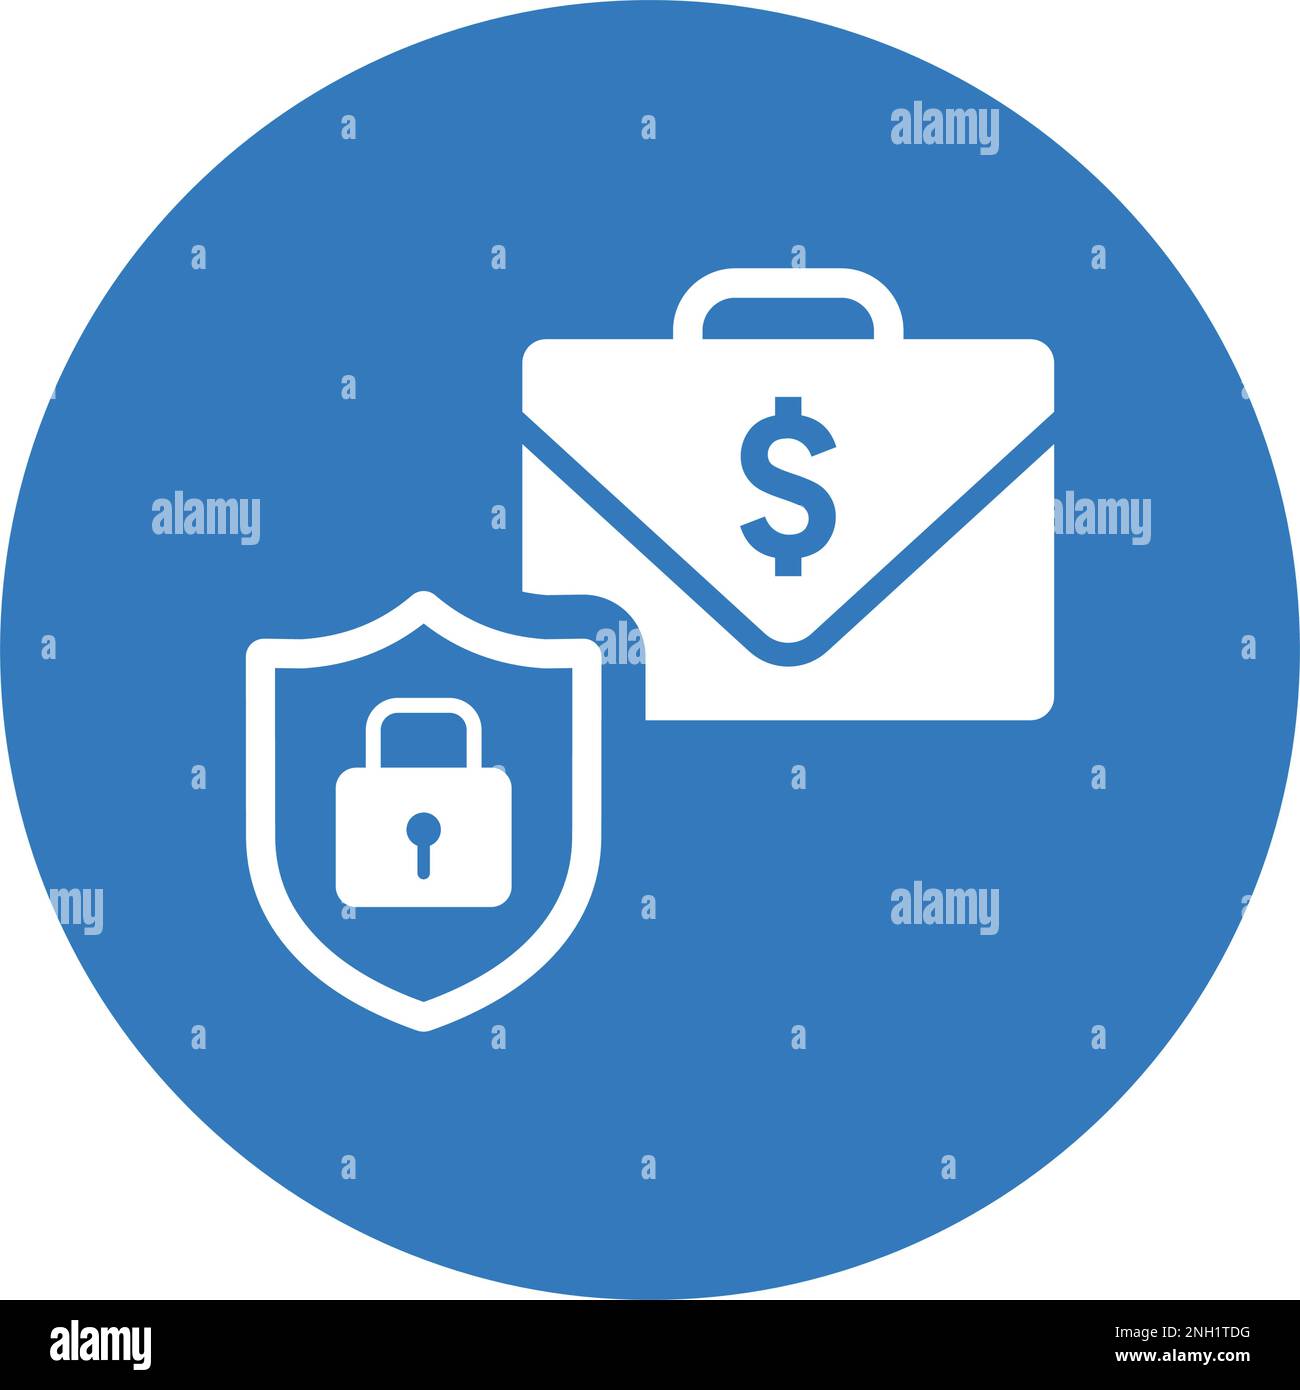 Business Security Icon design template vector illustration for graphic and web design or commercial purposes. Stock Vector